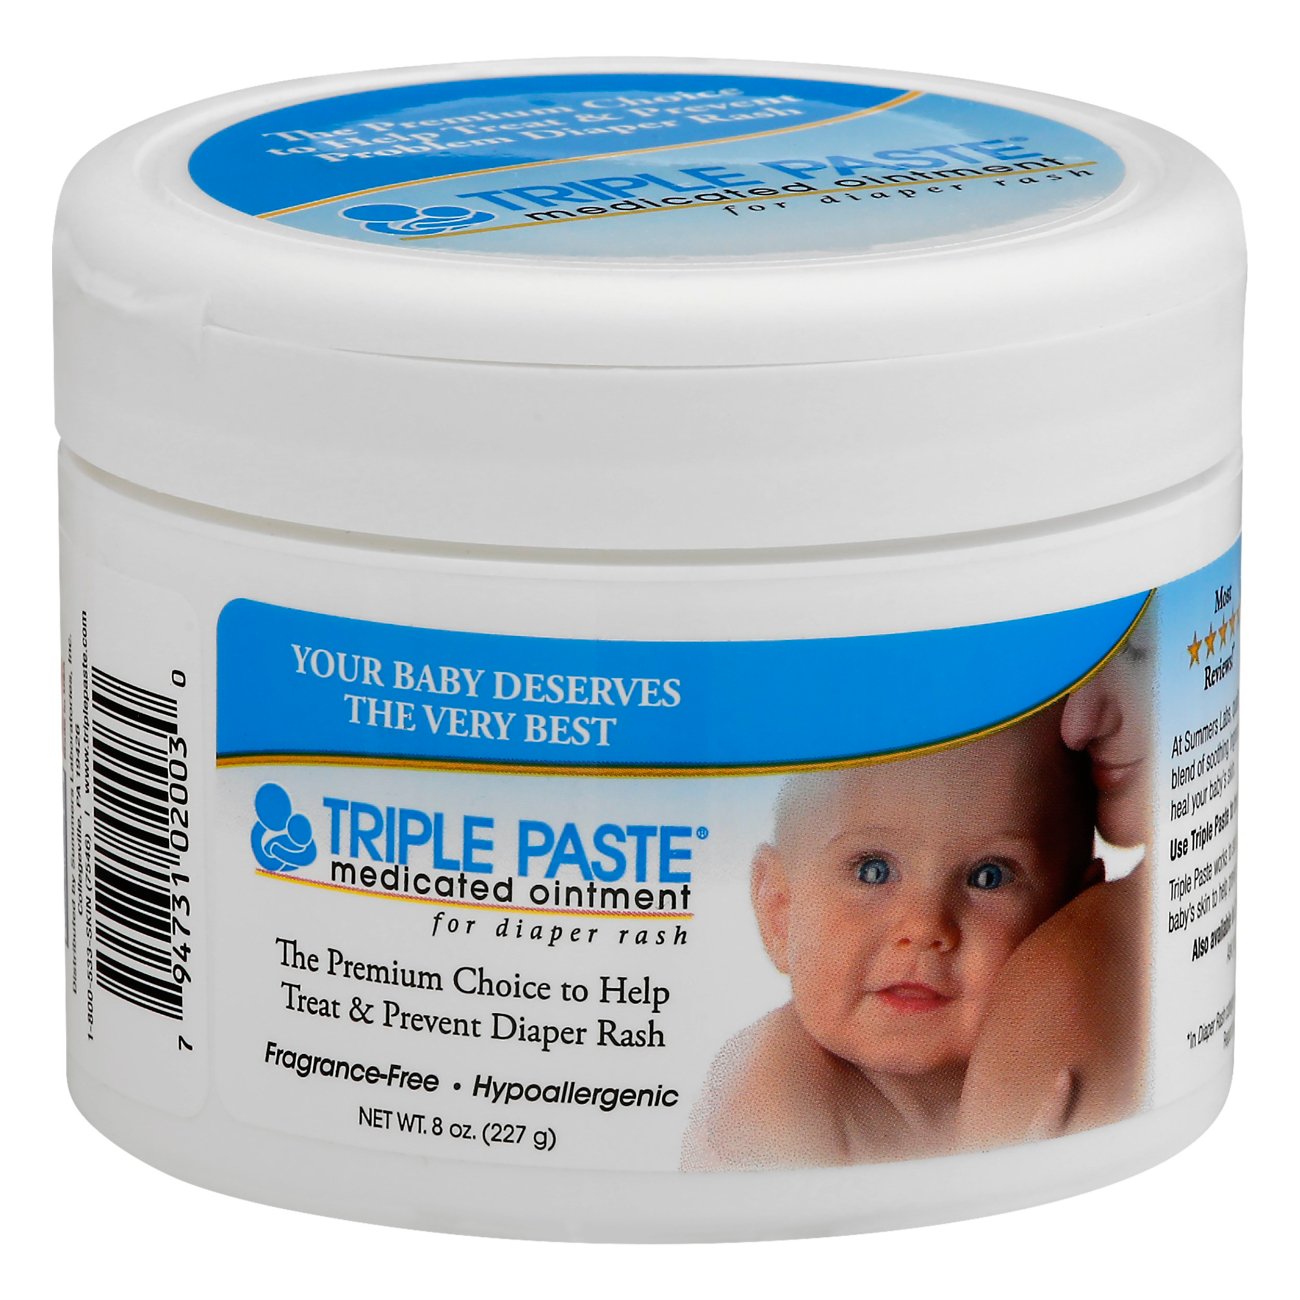 Apply For FREE Samples Of Our NEW Triple Paste Diaper Rash Ointments!